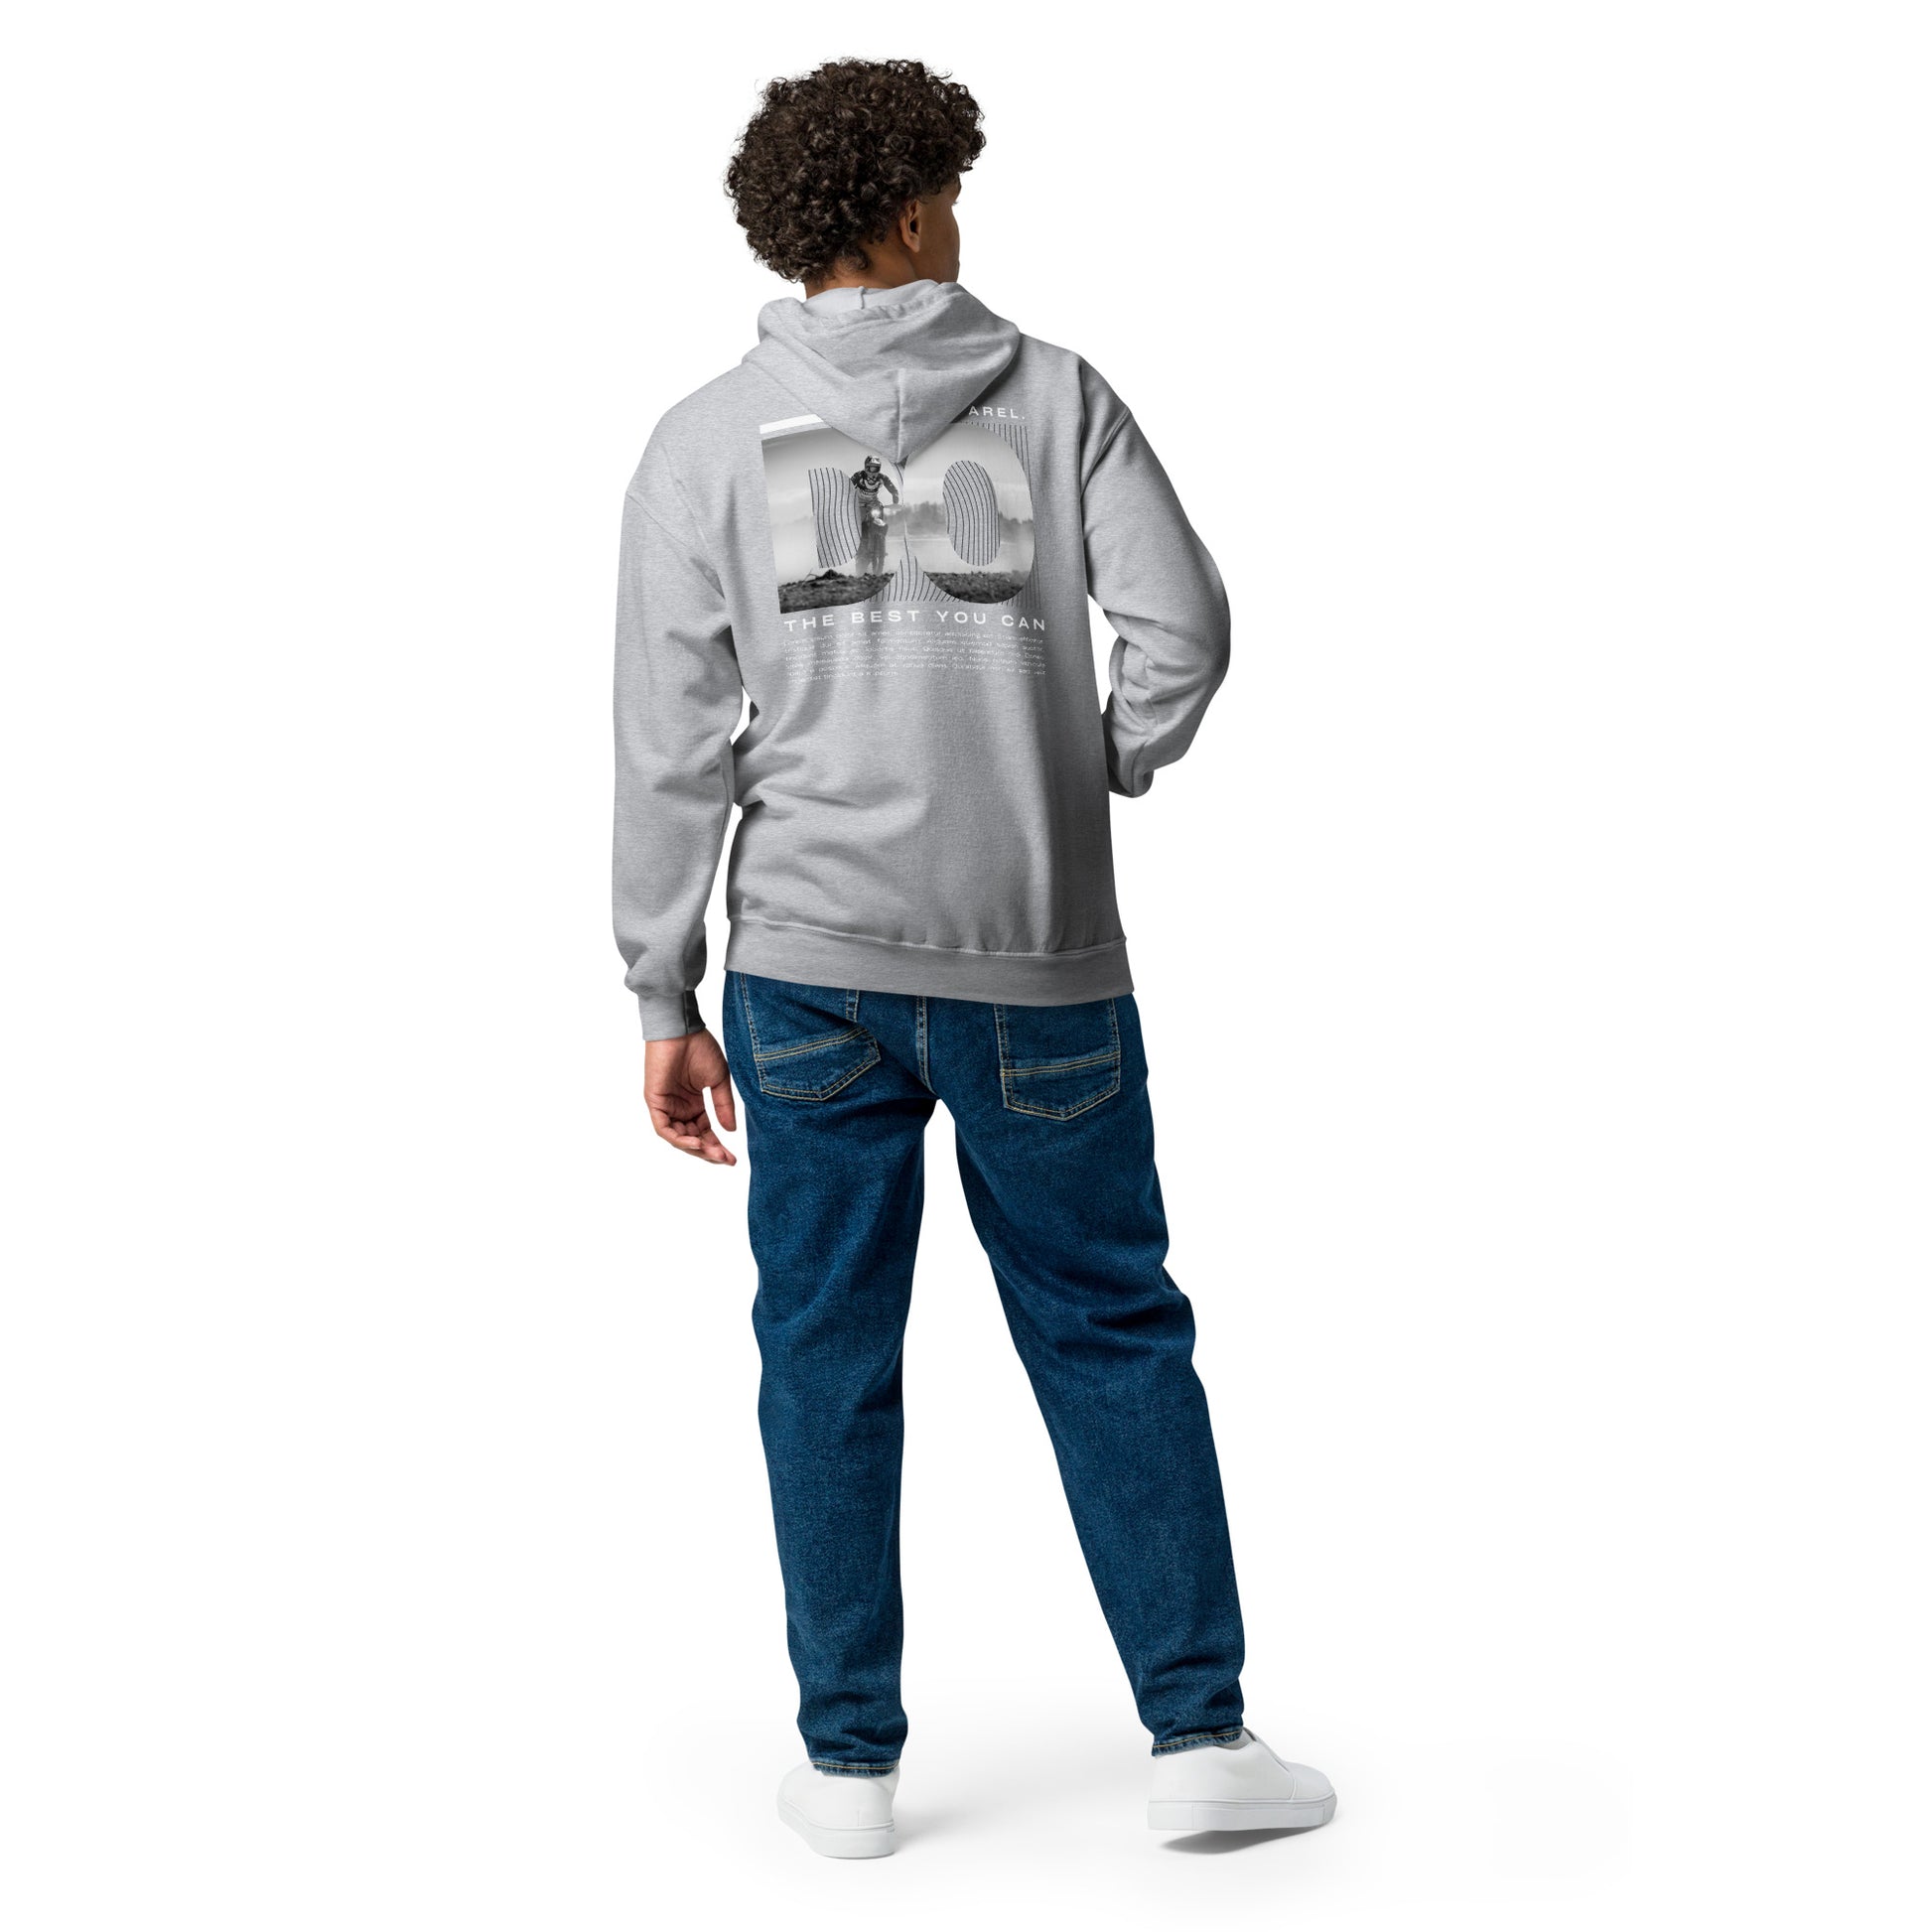 Stylish fleece hoodie featuring a metal zipper, front pockets, and drawstring hood in a rich, comfortable design